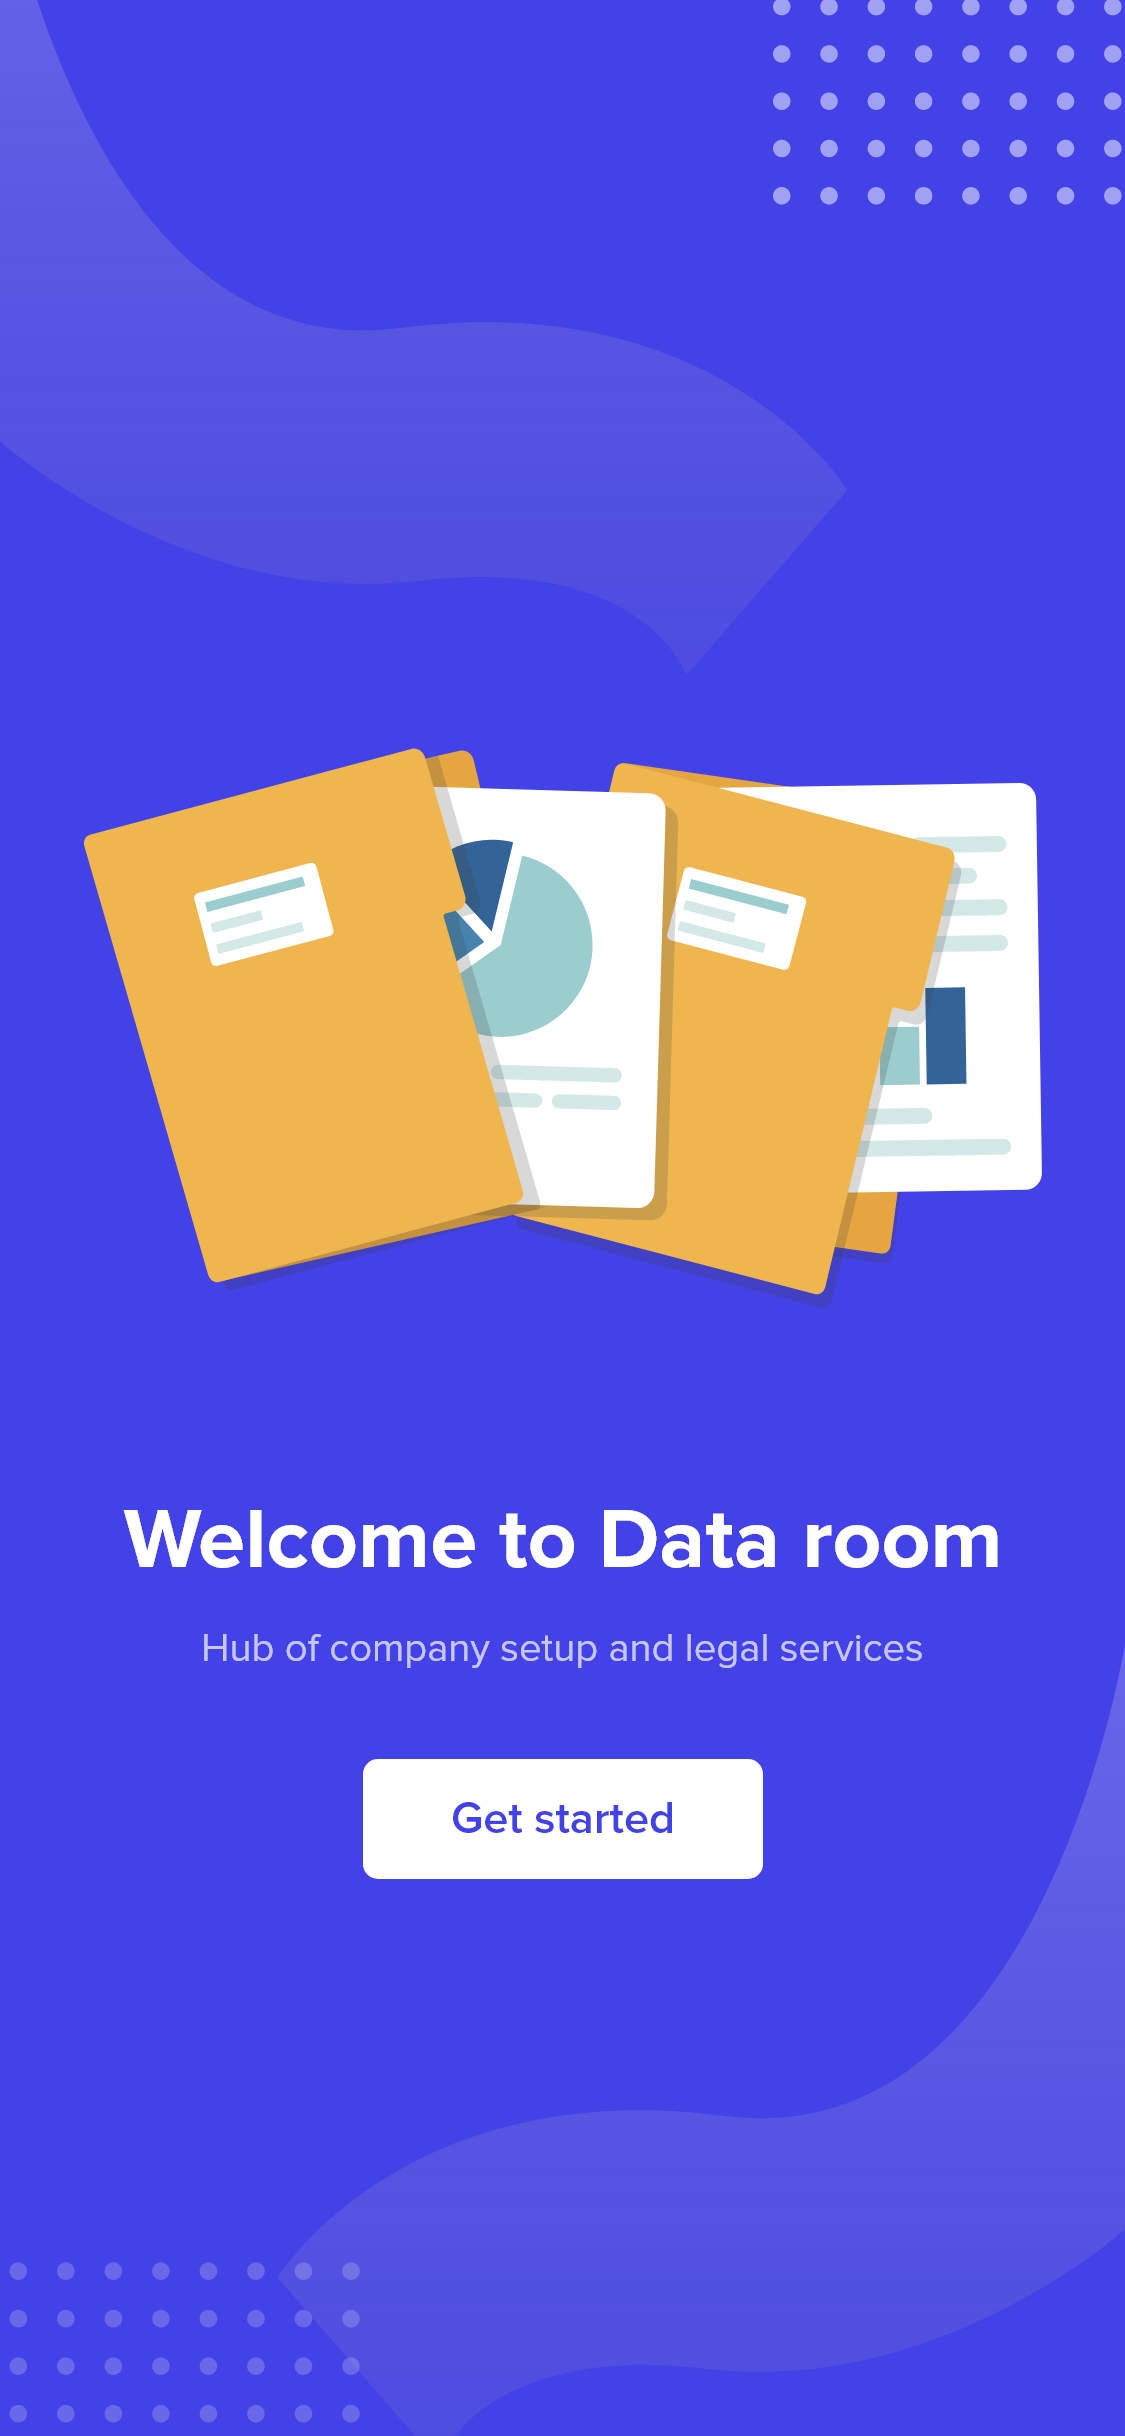 Welcome to Data room